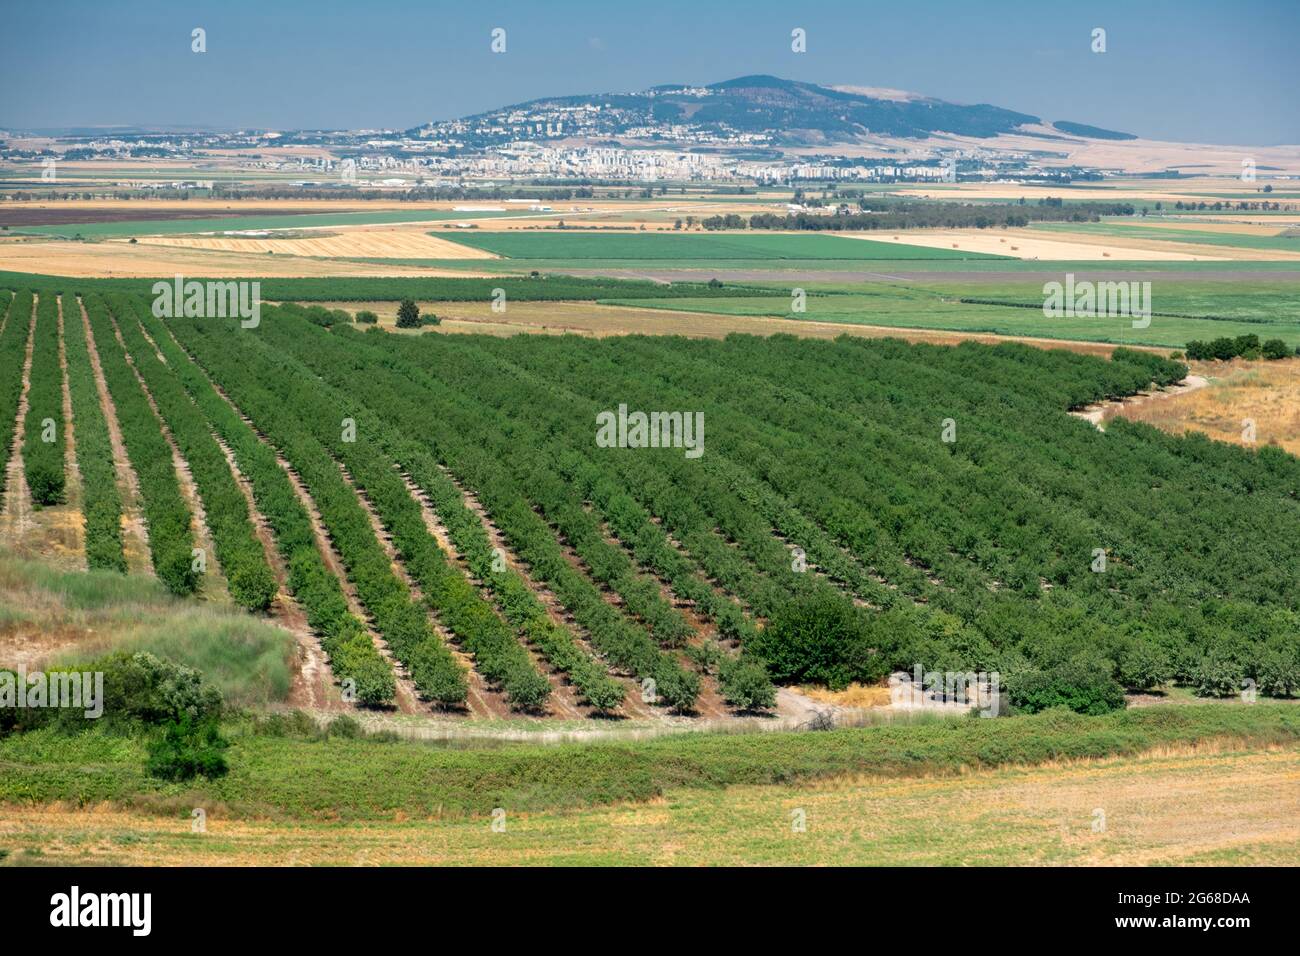 nature and landscape in Israel. High quality photo. landscape on a sunny day Stock Photo